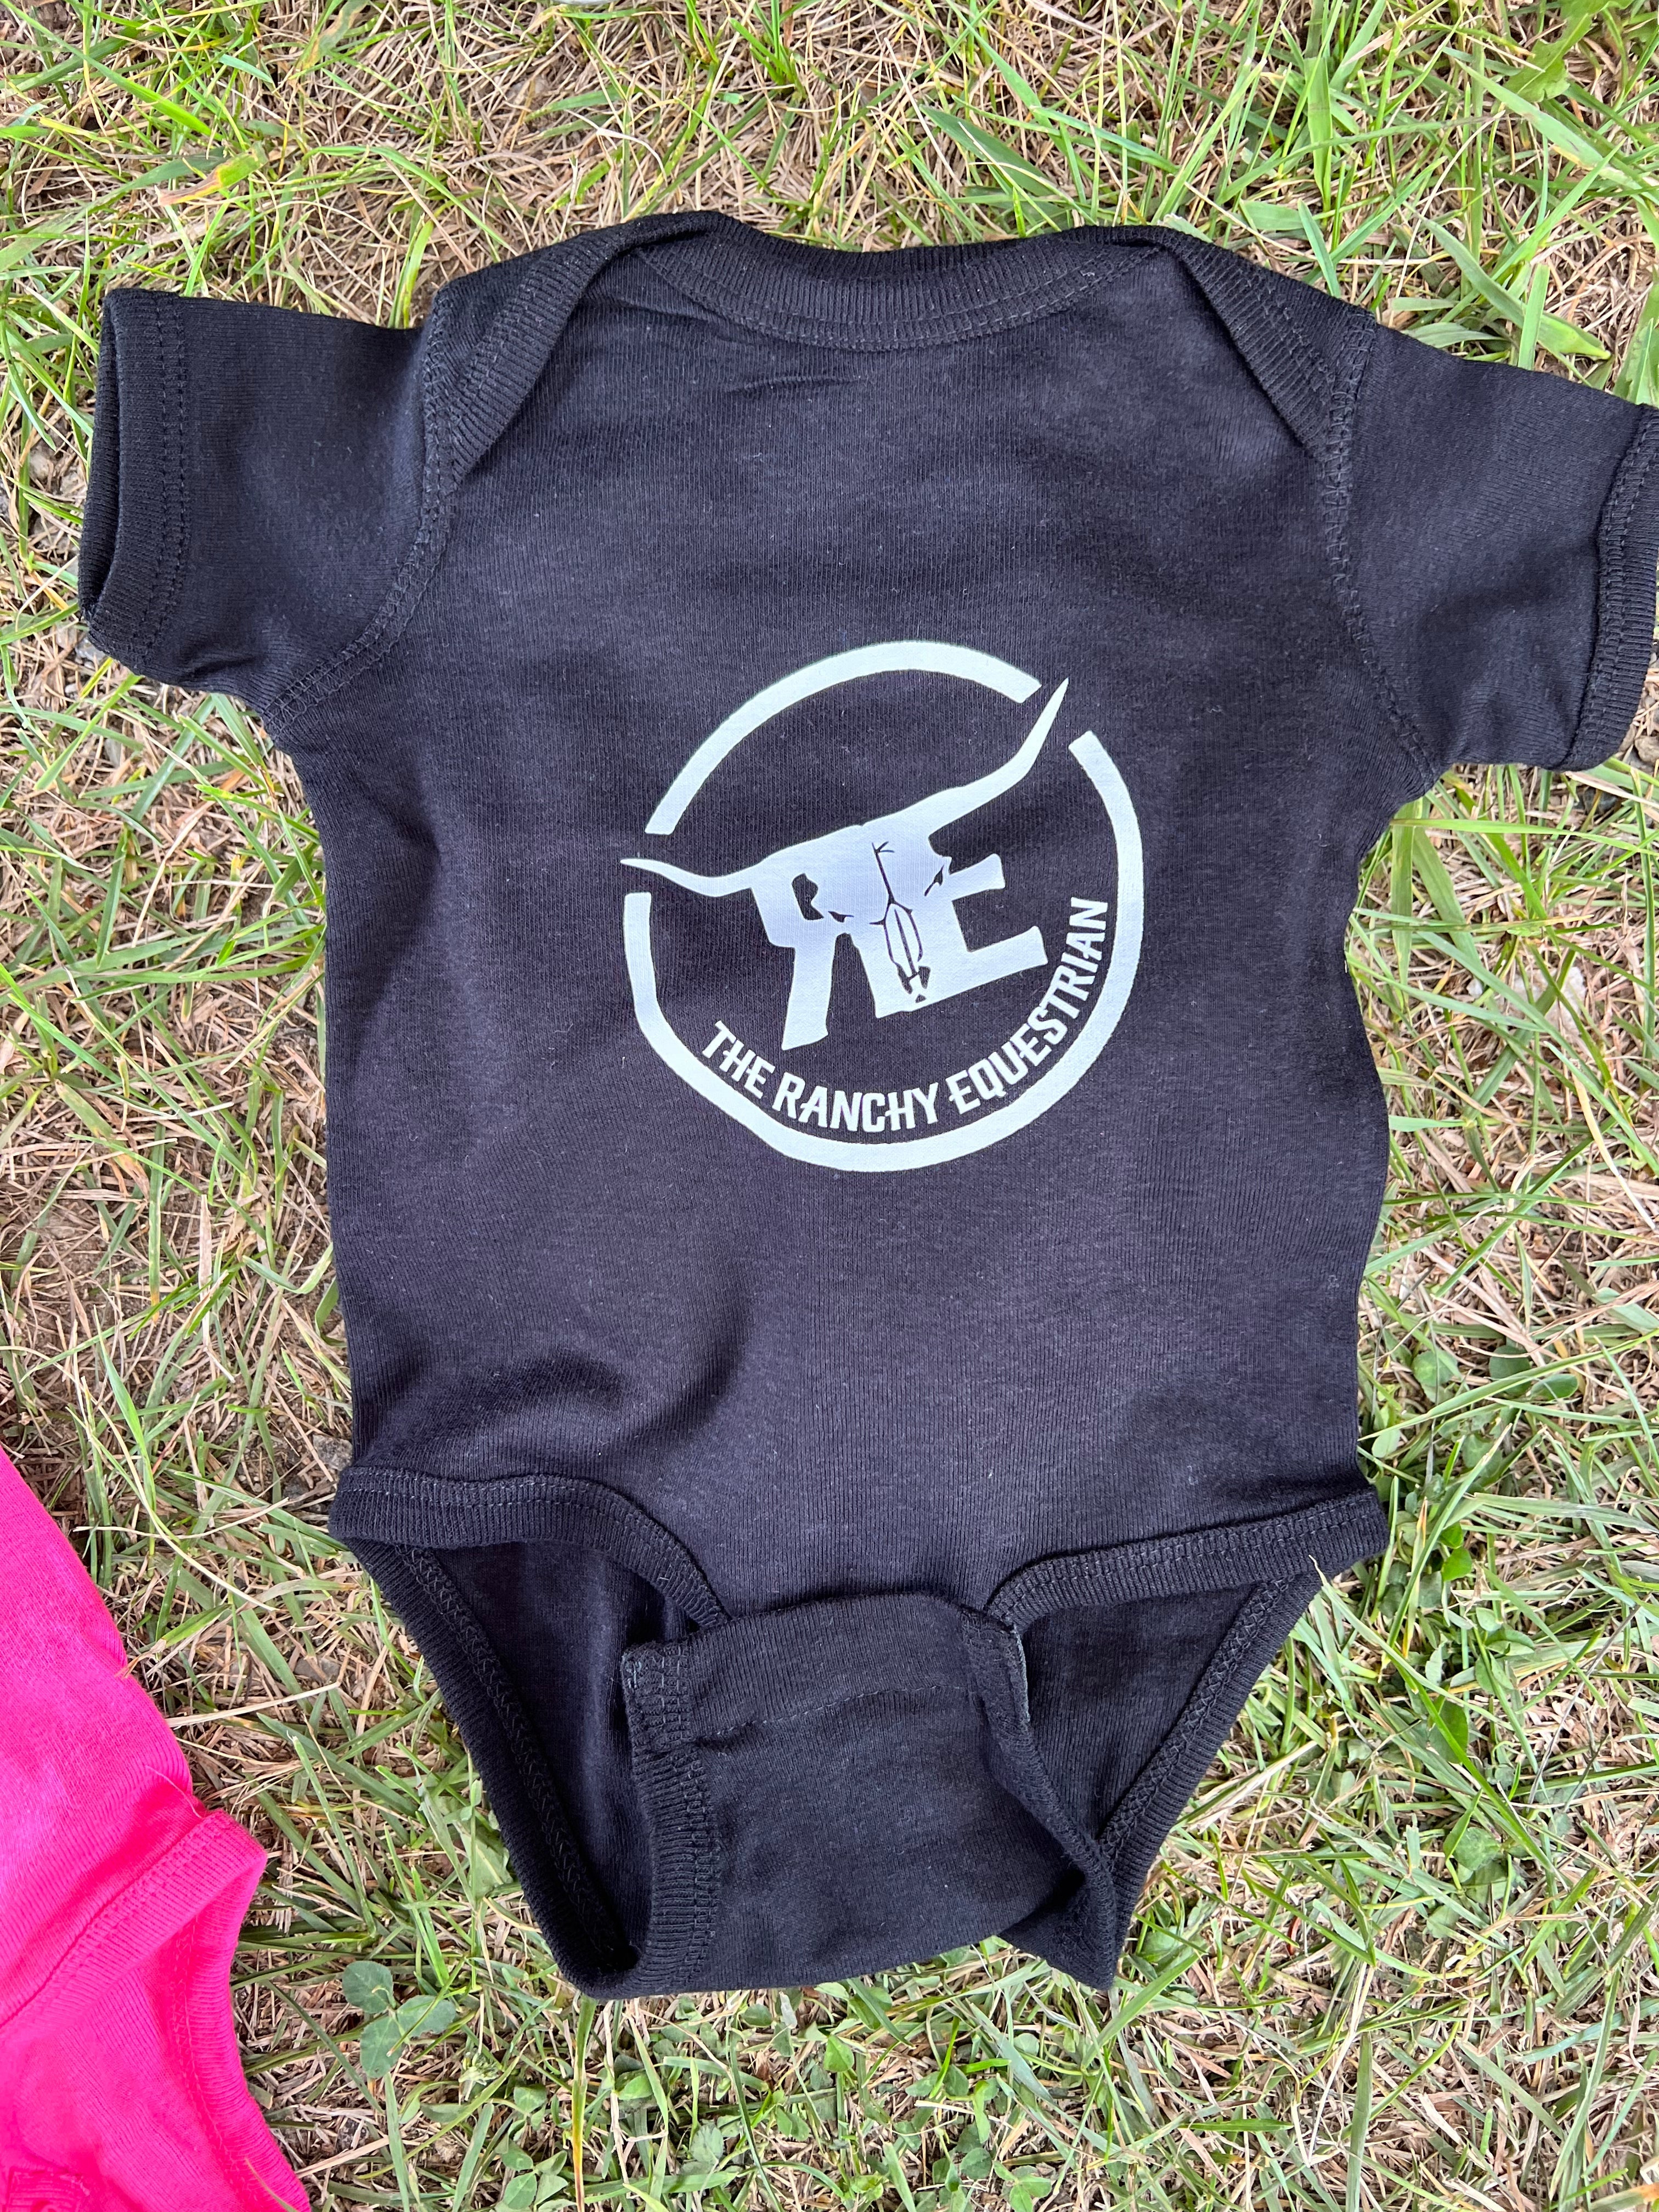 Full Circle Infant Sleeper - The Ranchy Equestrian